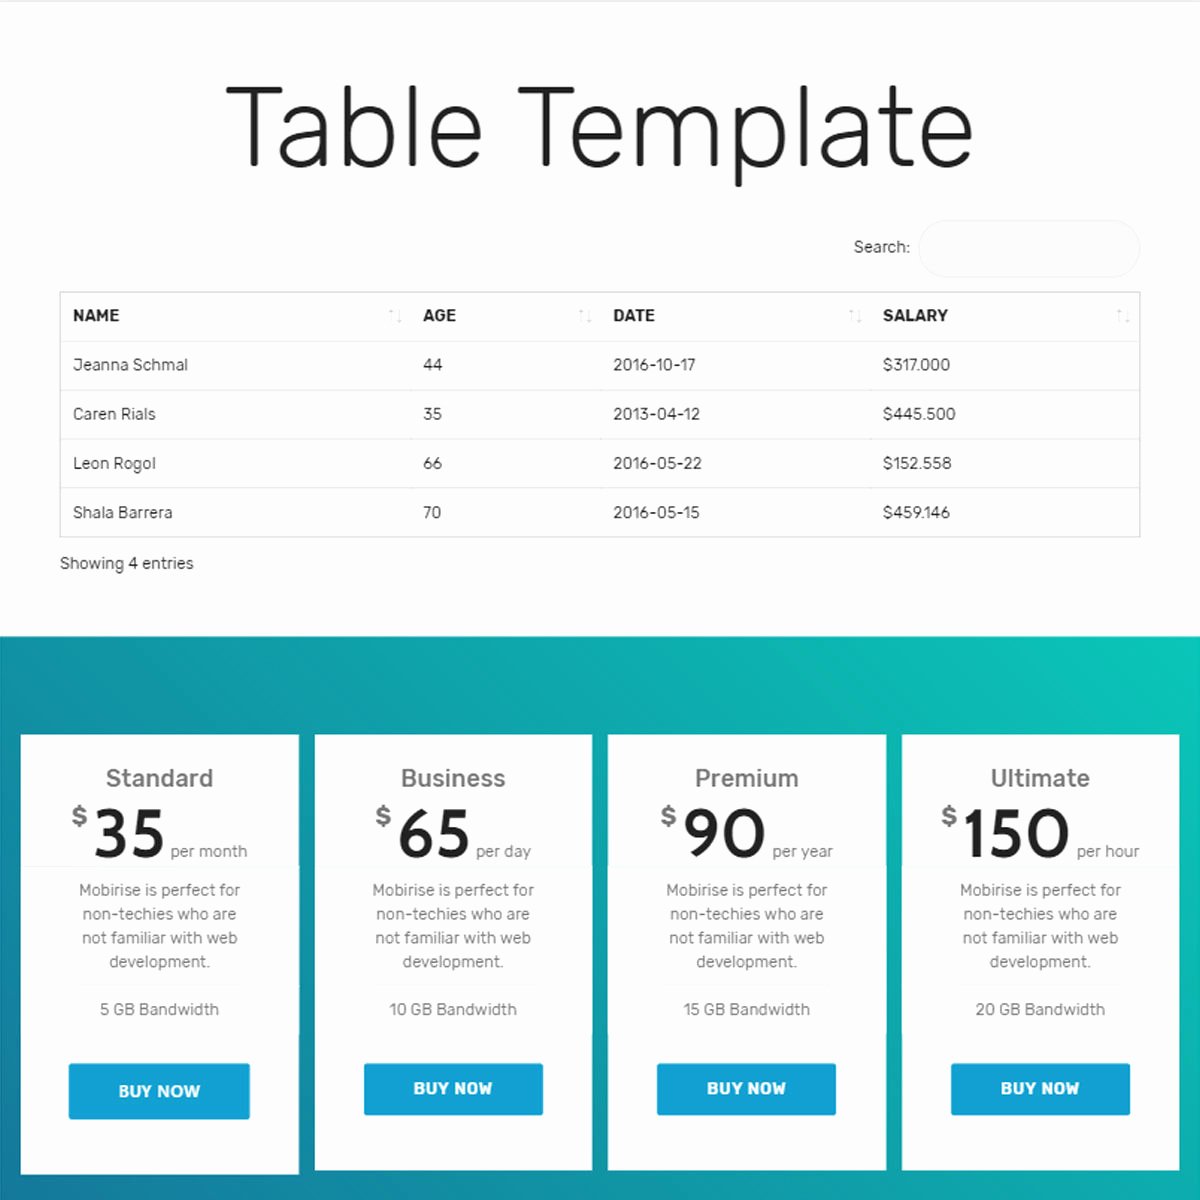 39 Brand New Free HTML Bootstrap Templates 2019